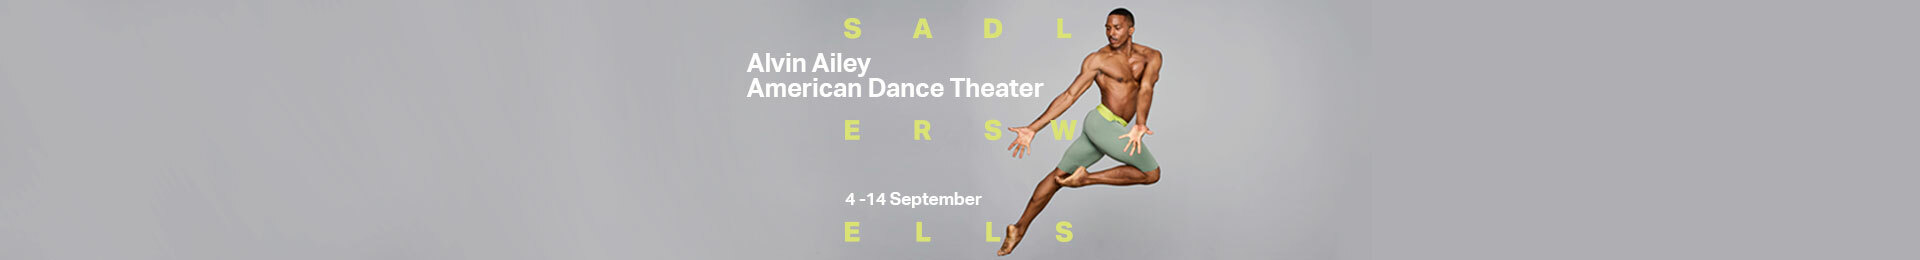 Alvin Ailey American Dance Theatre: Programme A banner image